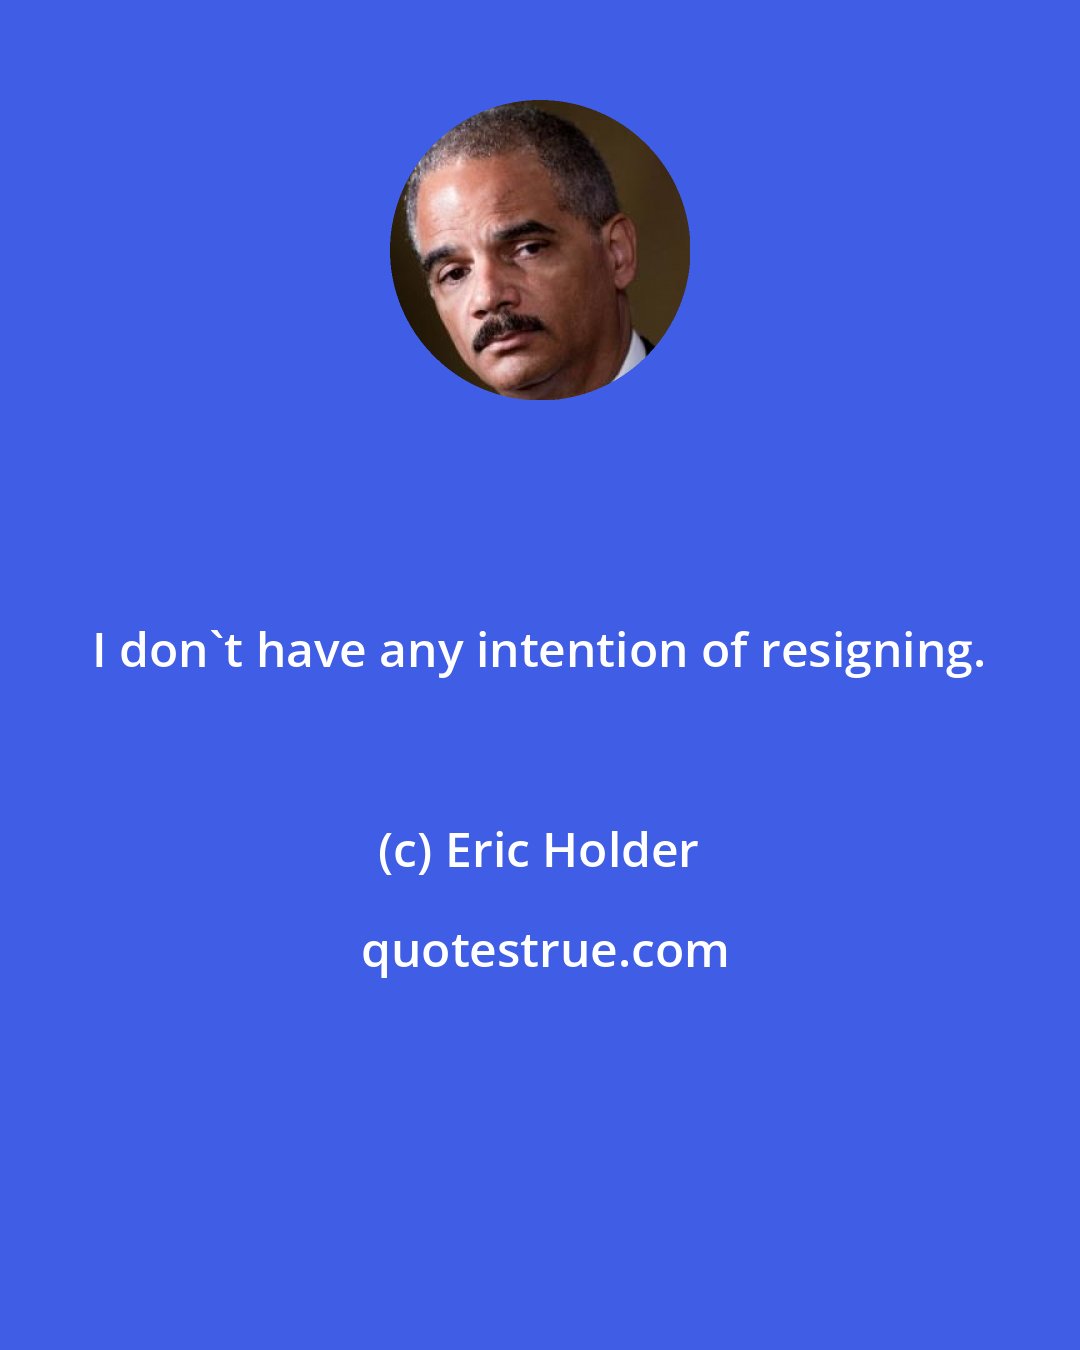 Eric Holder: I don't have any intention of resigning.